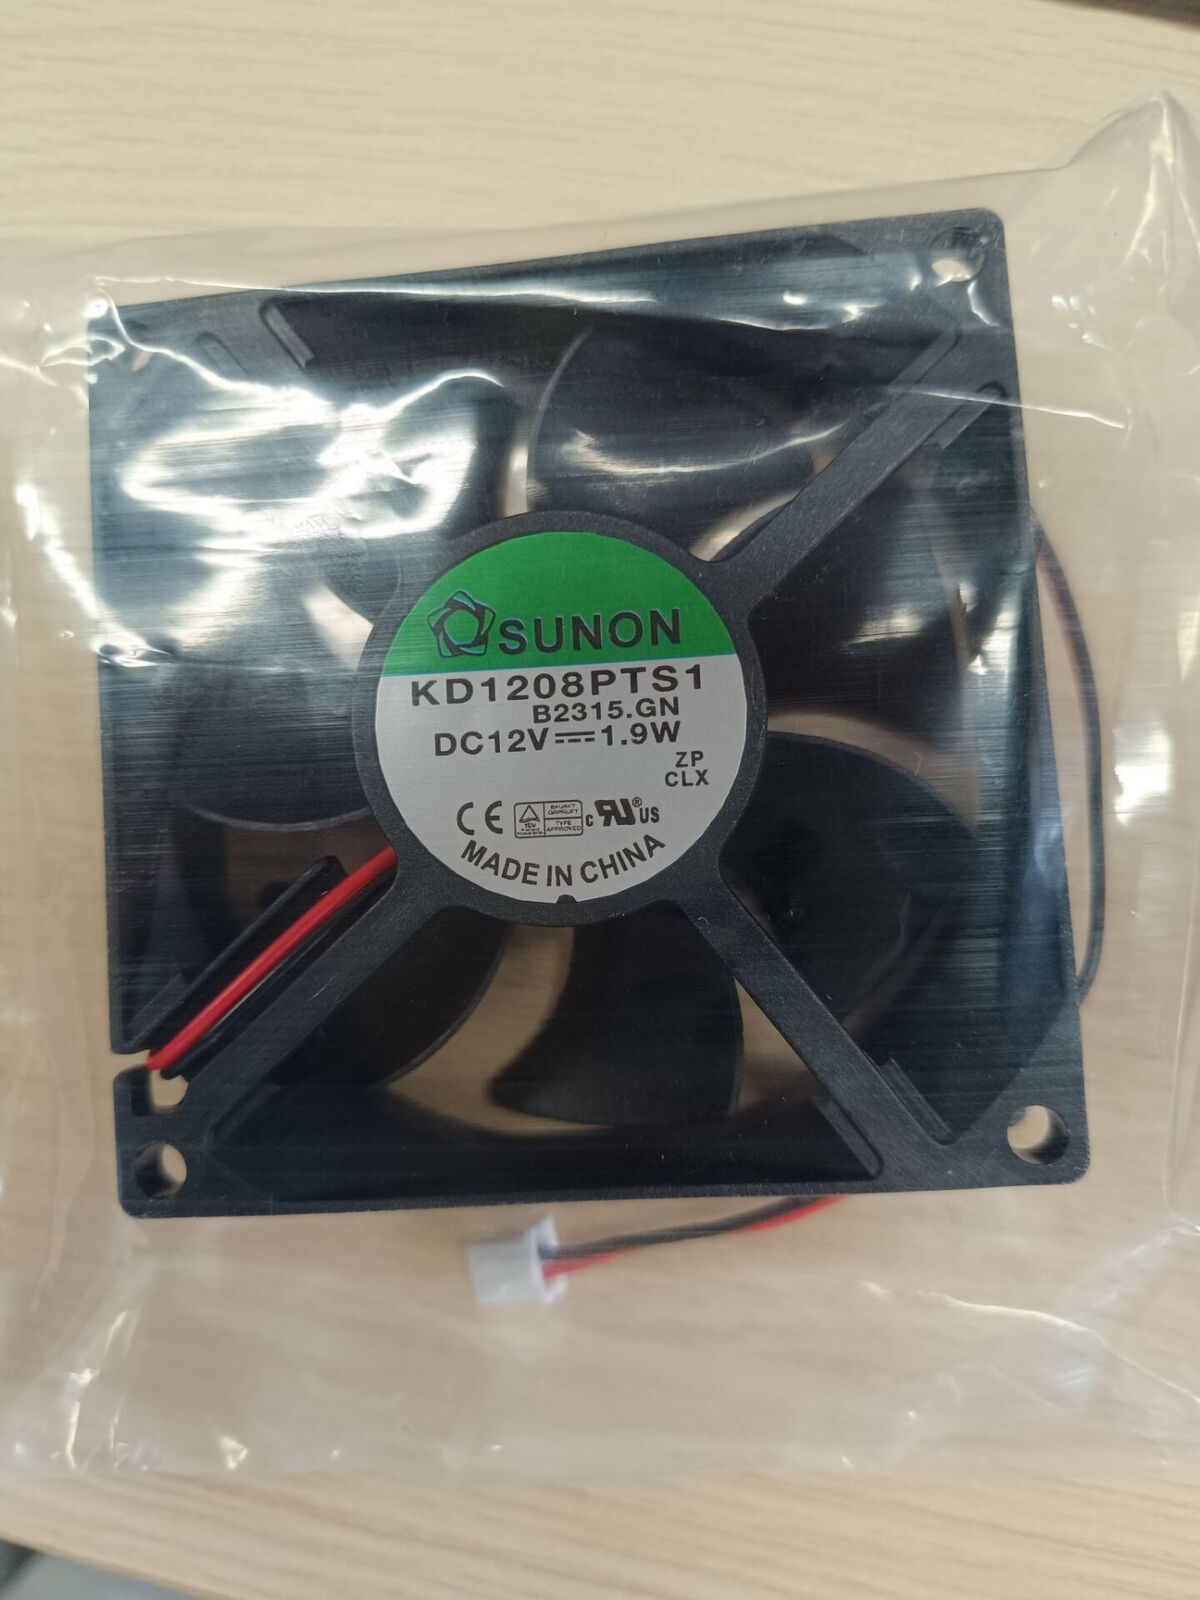 SUNON KD1208PTS1 8025 80mm x 25mm Cooler Cooling Case Fan DC 12V 1.9W 2Wire